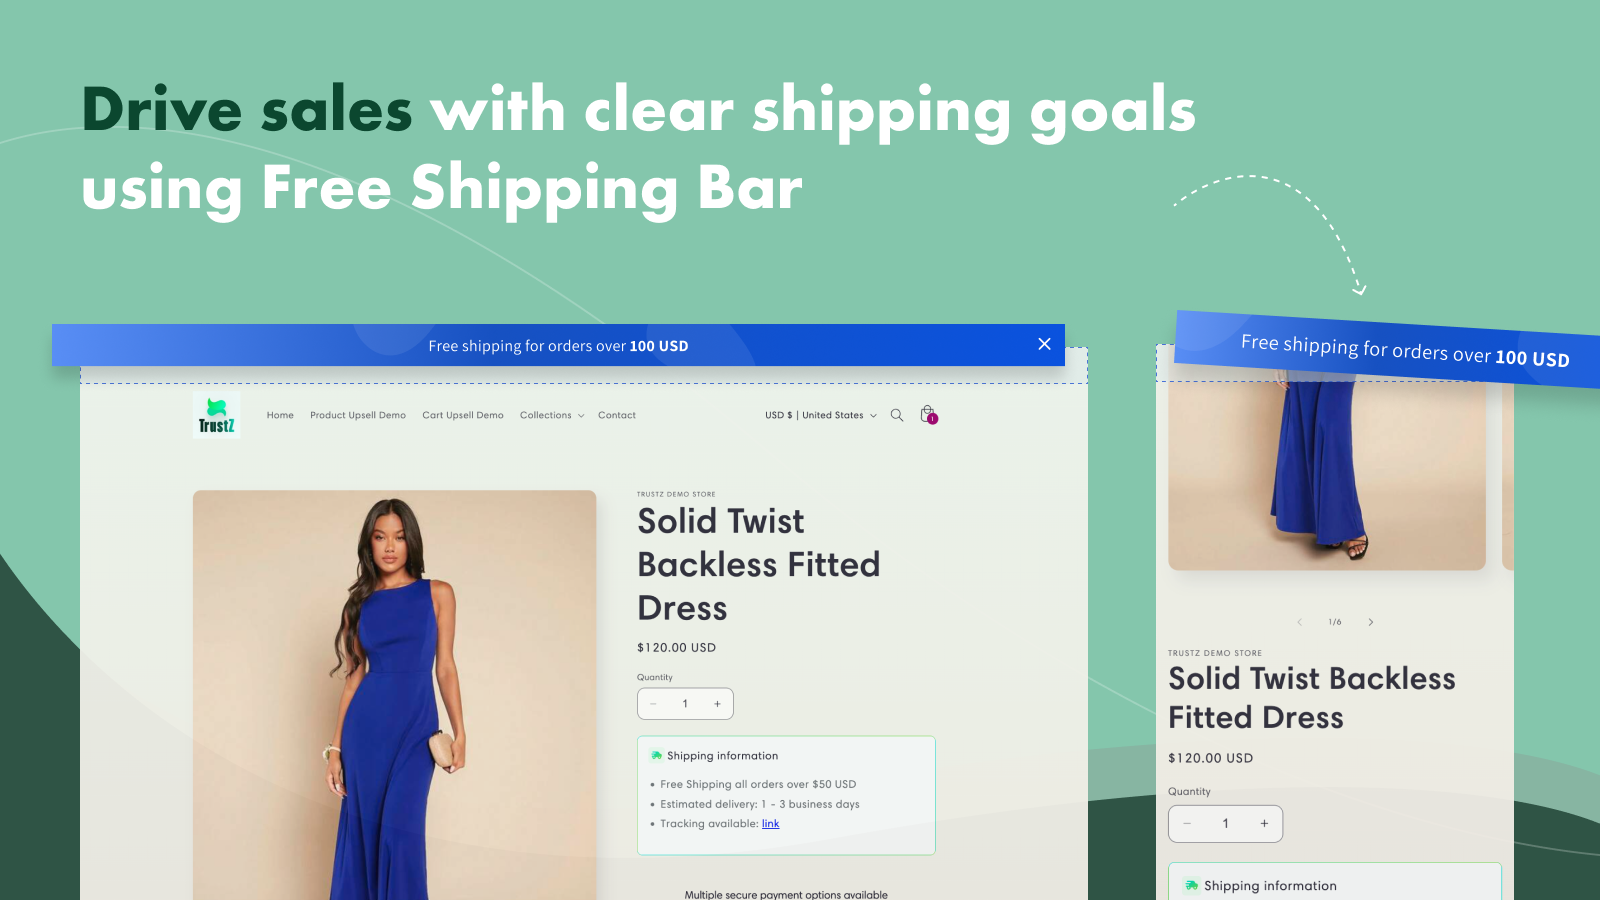 Drive sales with clear shipping goals using Free Shipping Bar